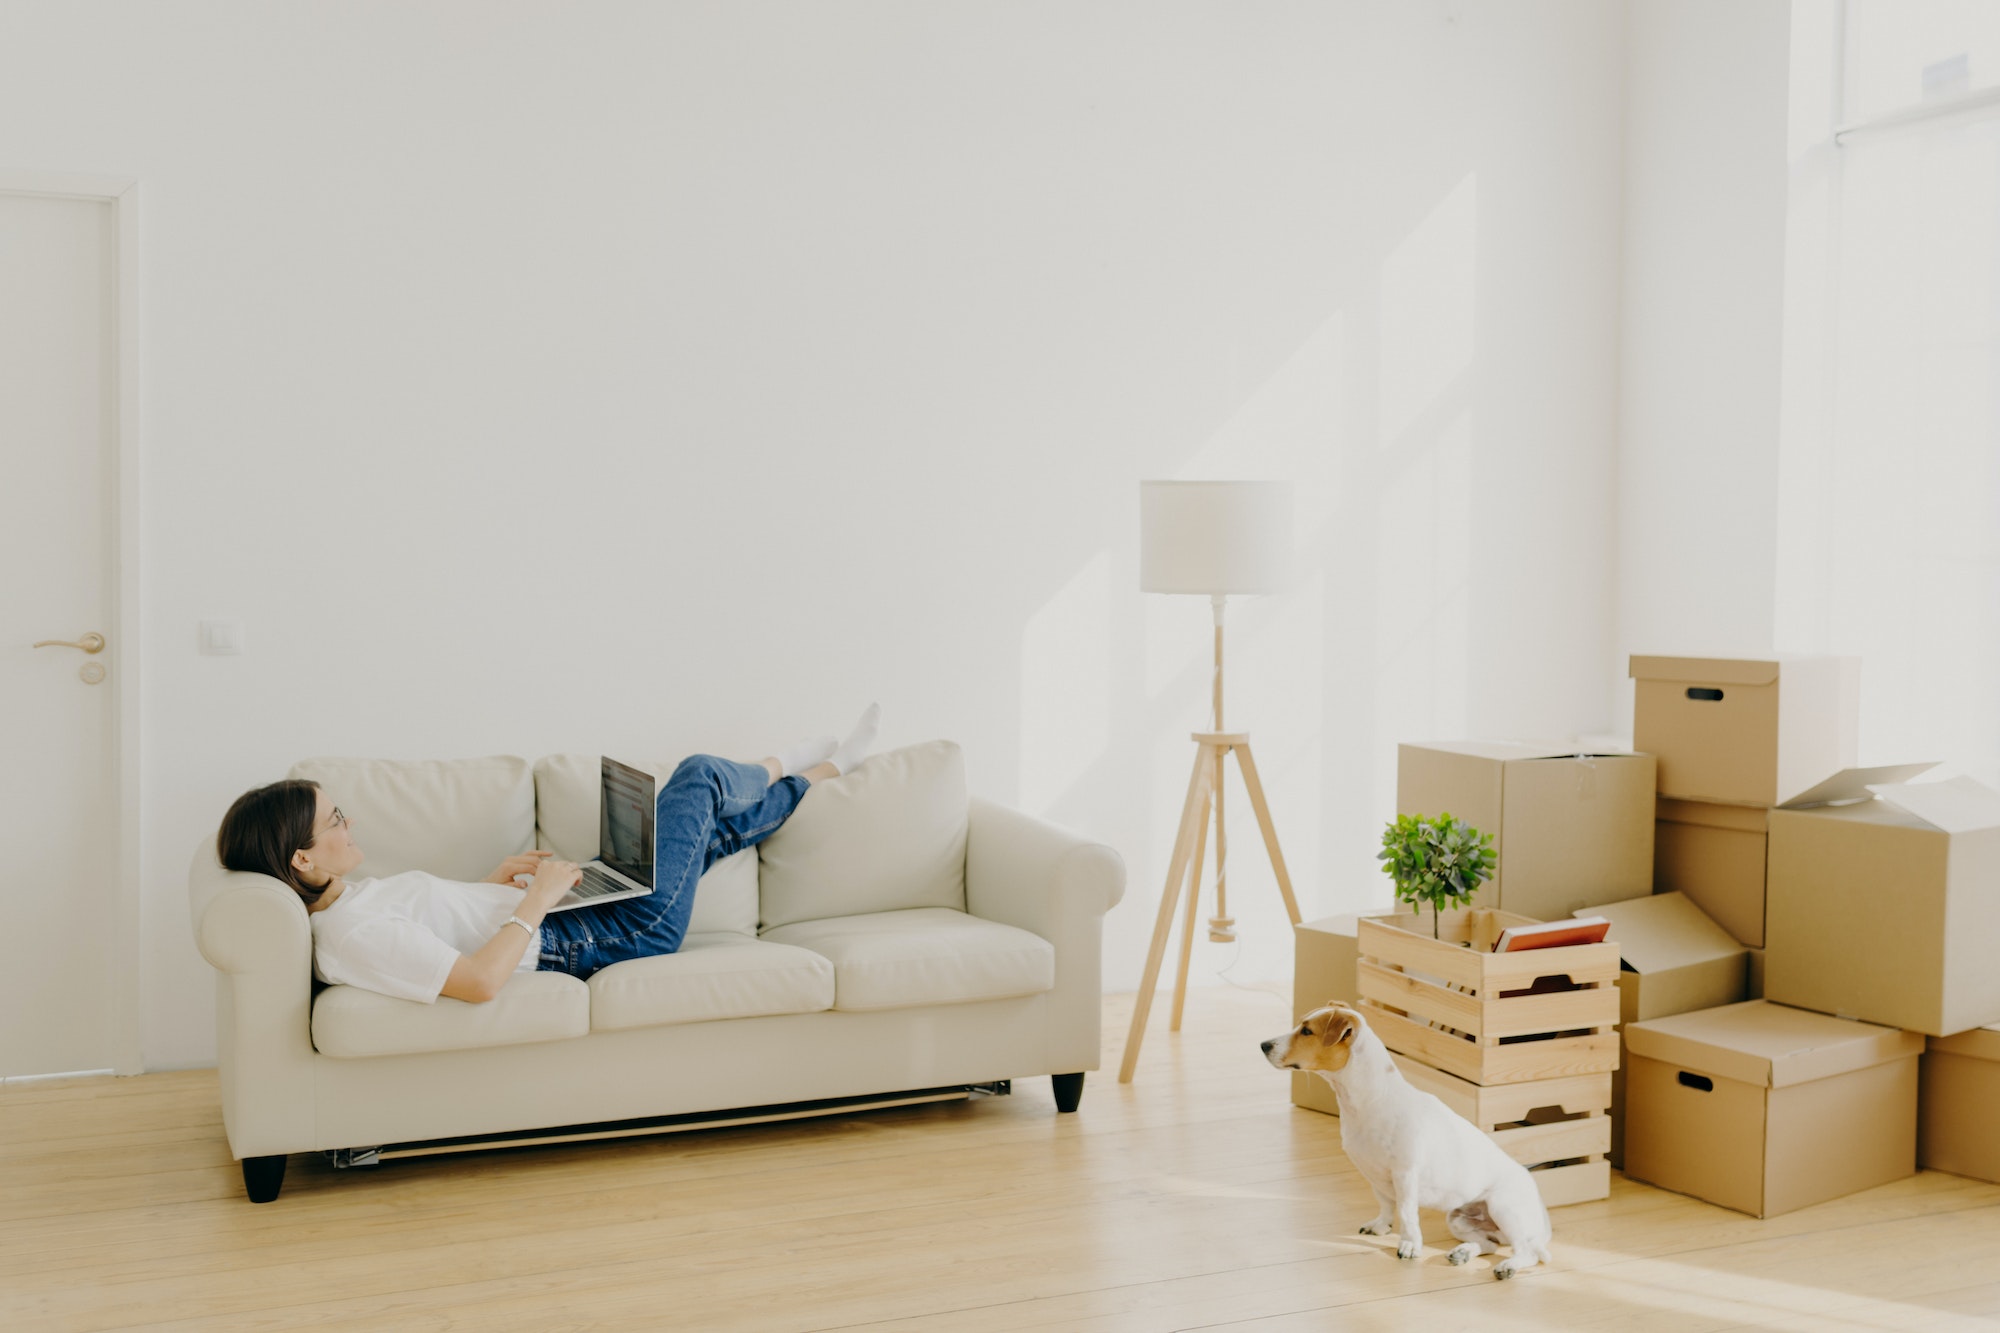 Tips for Renting Your First Apartment! (Budget, Tours, Moving In)